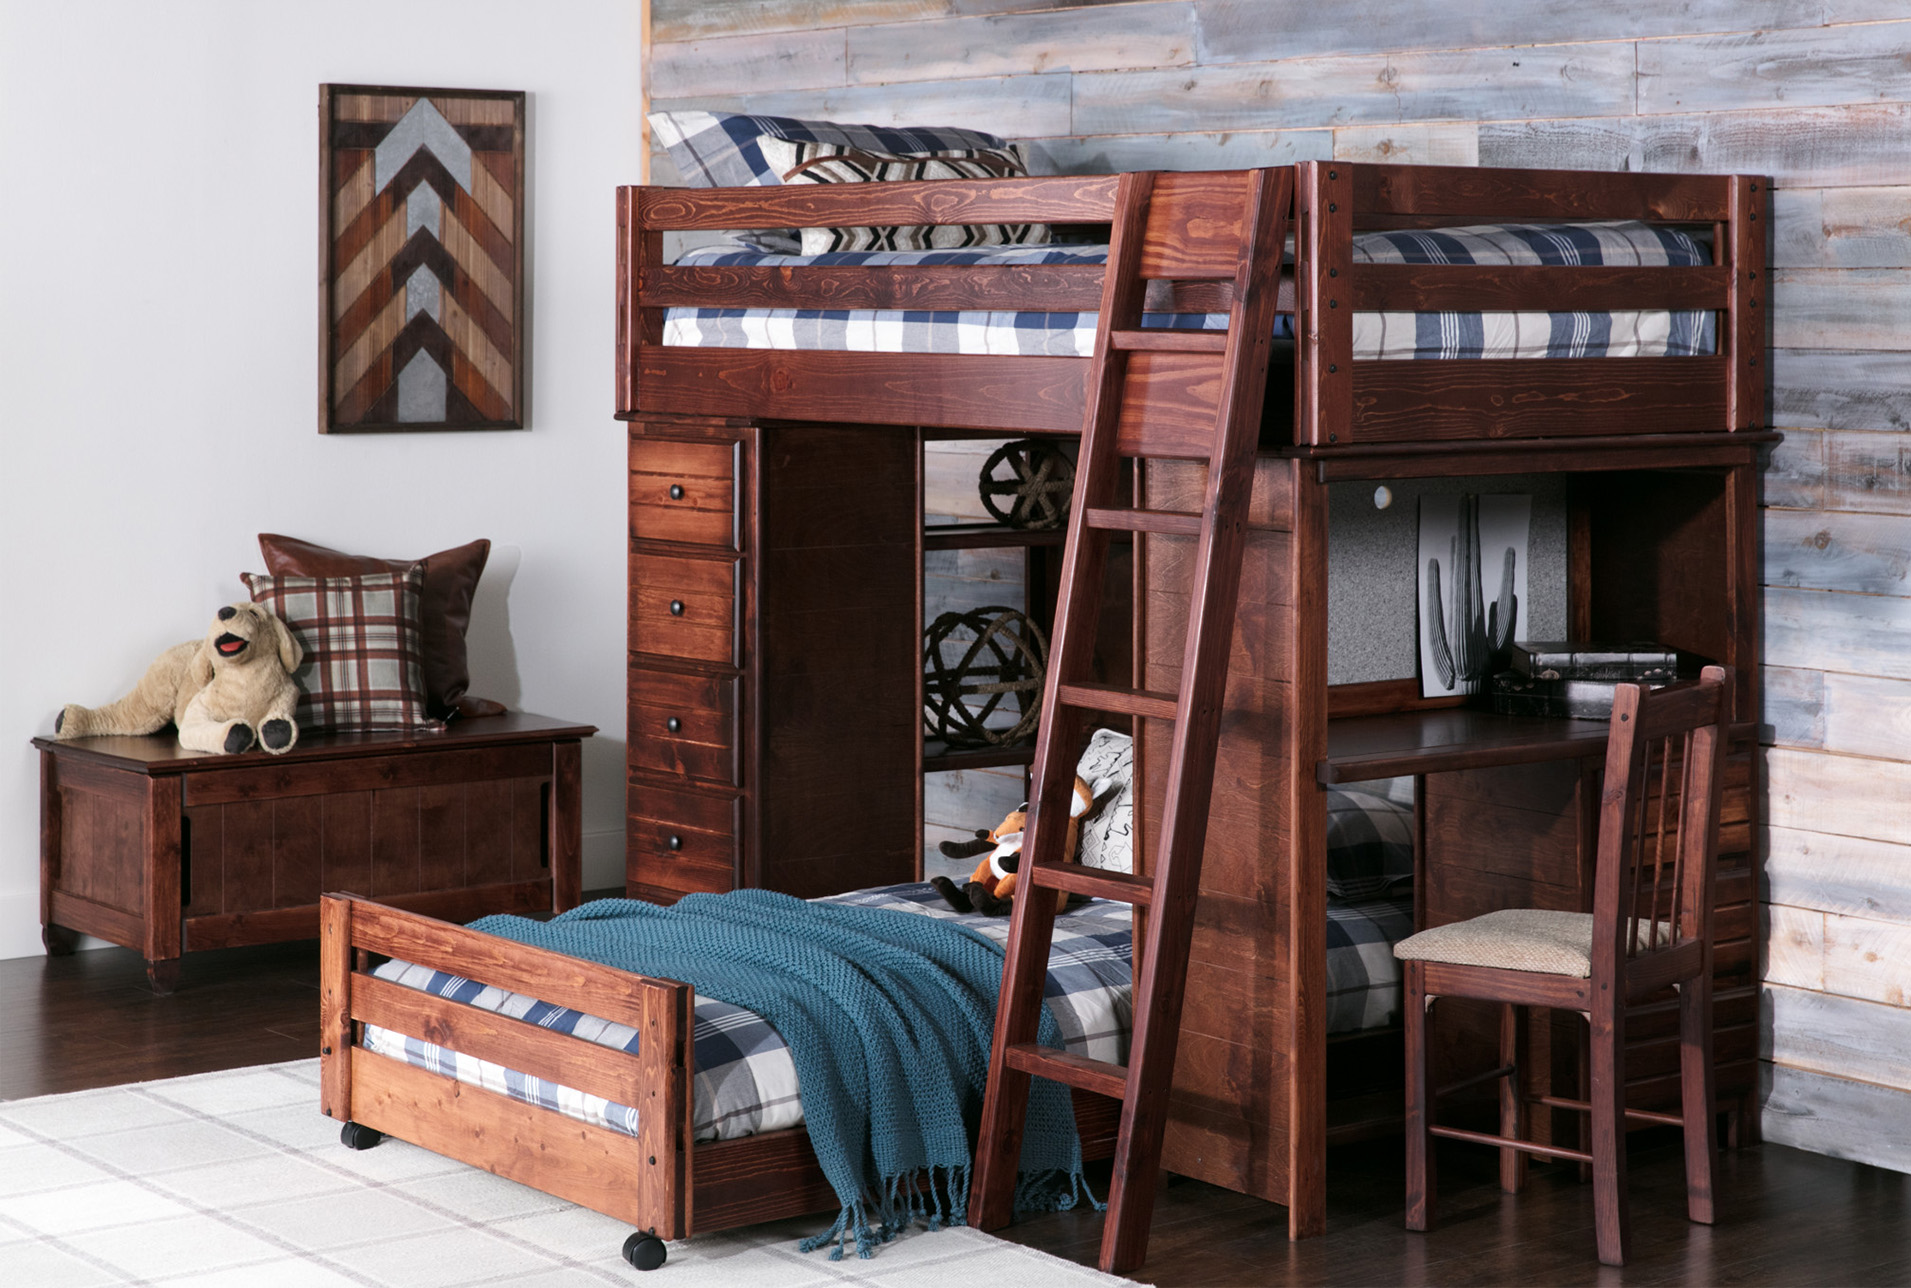 Living Spaces Bunk Bed New Daily Offers, Living Spaces Sedona Bunk Bed